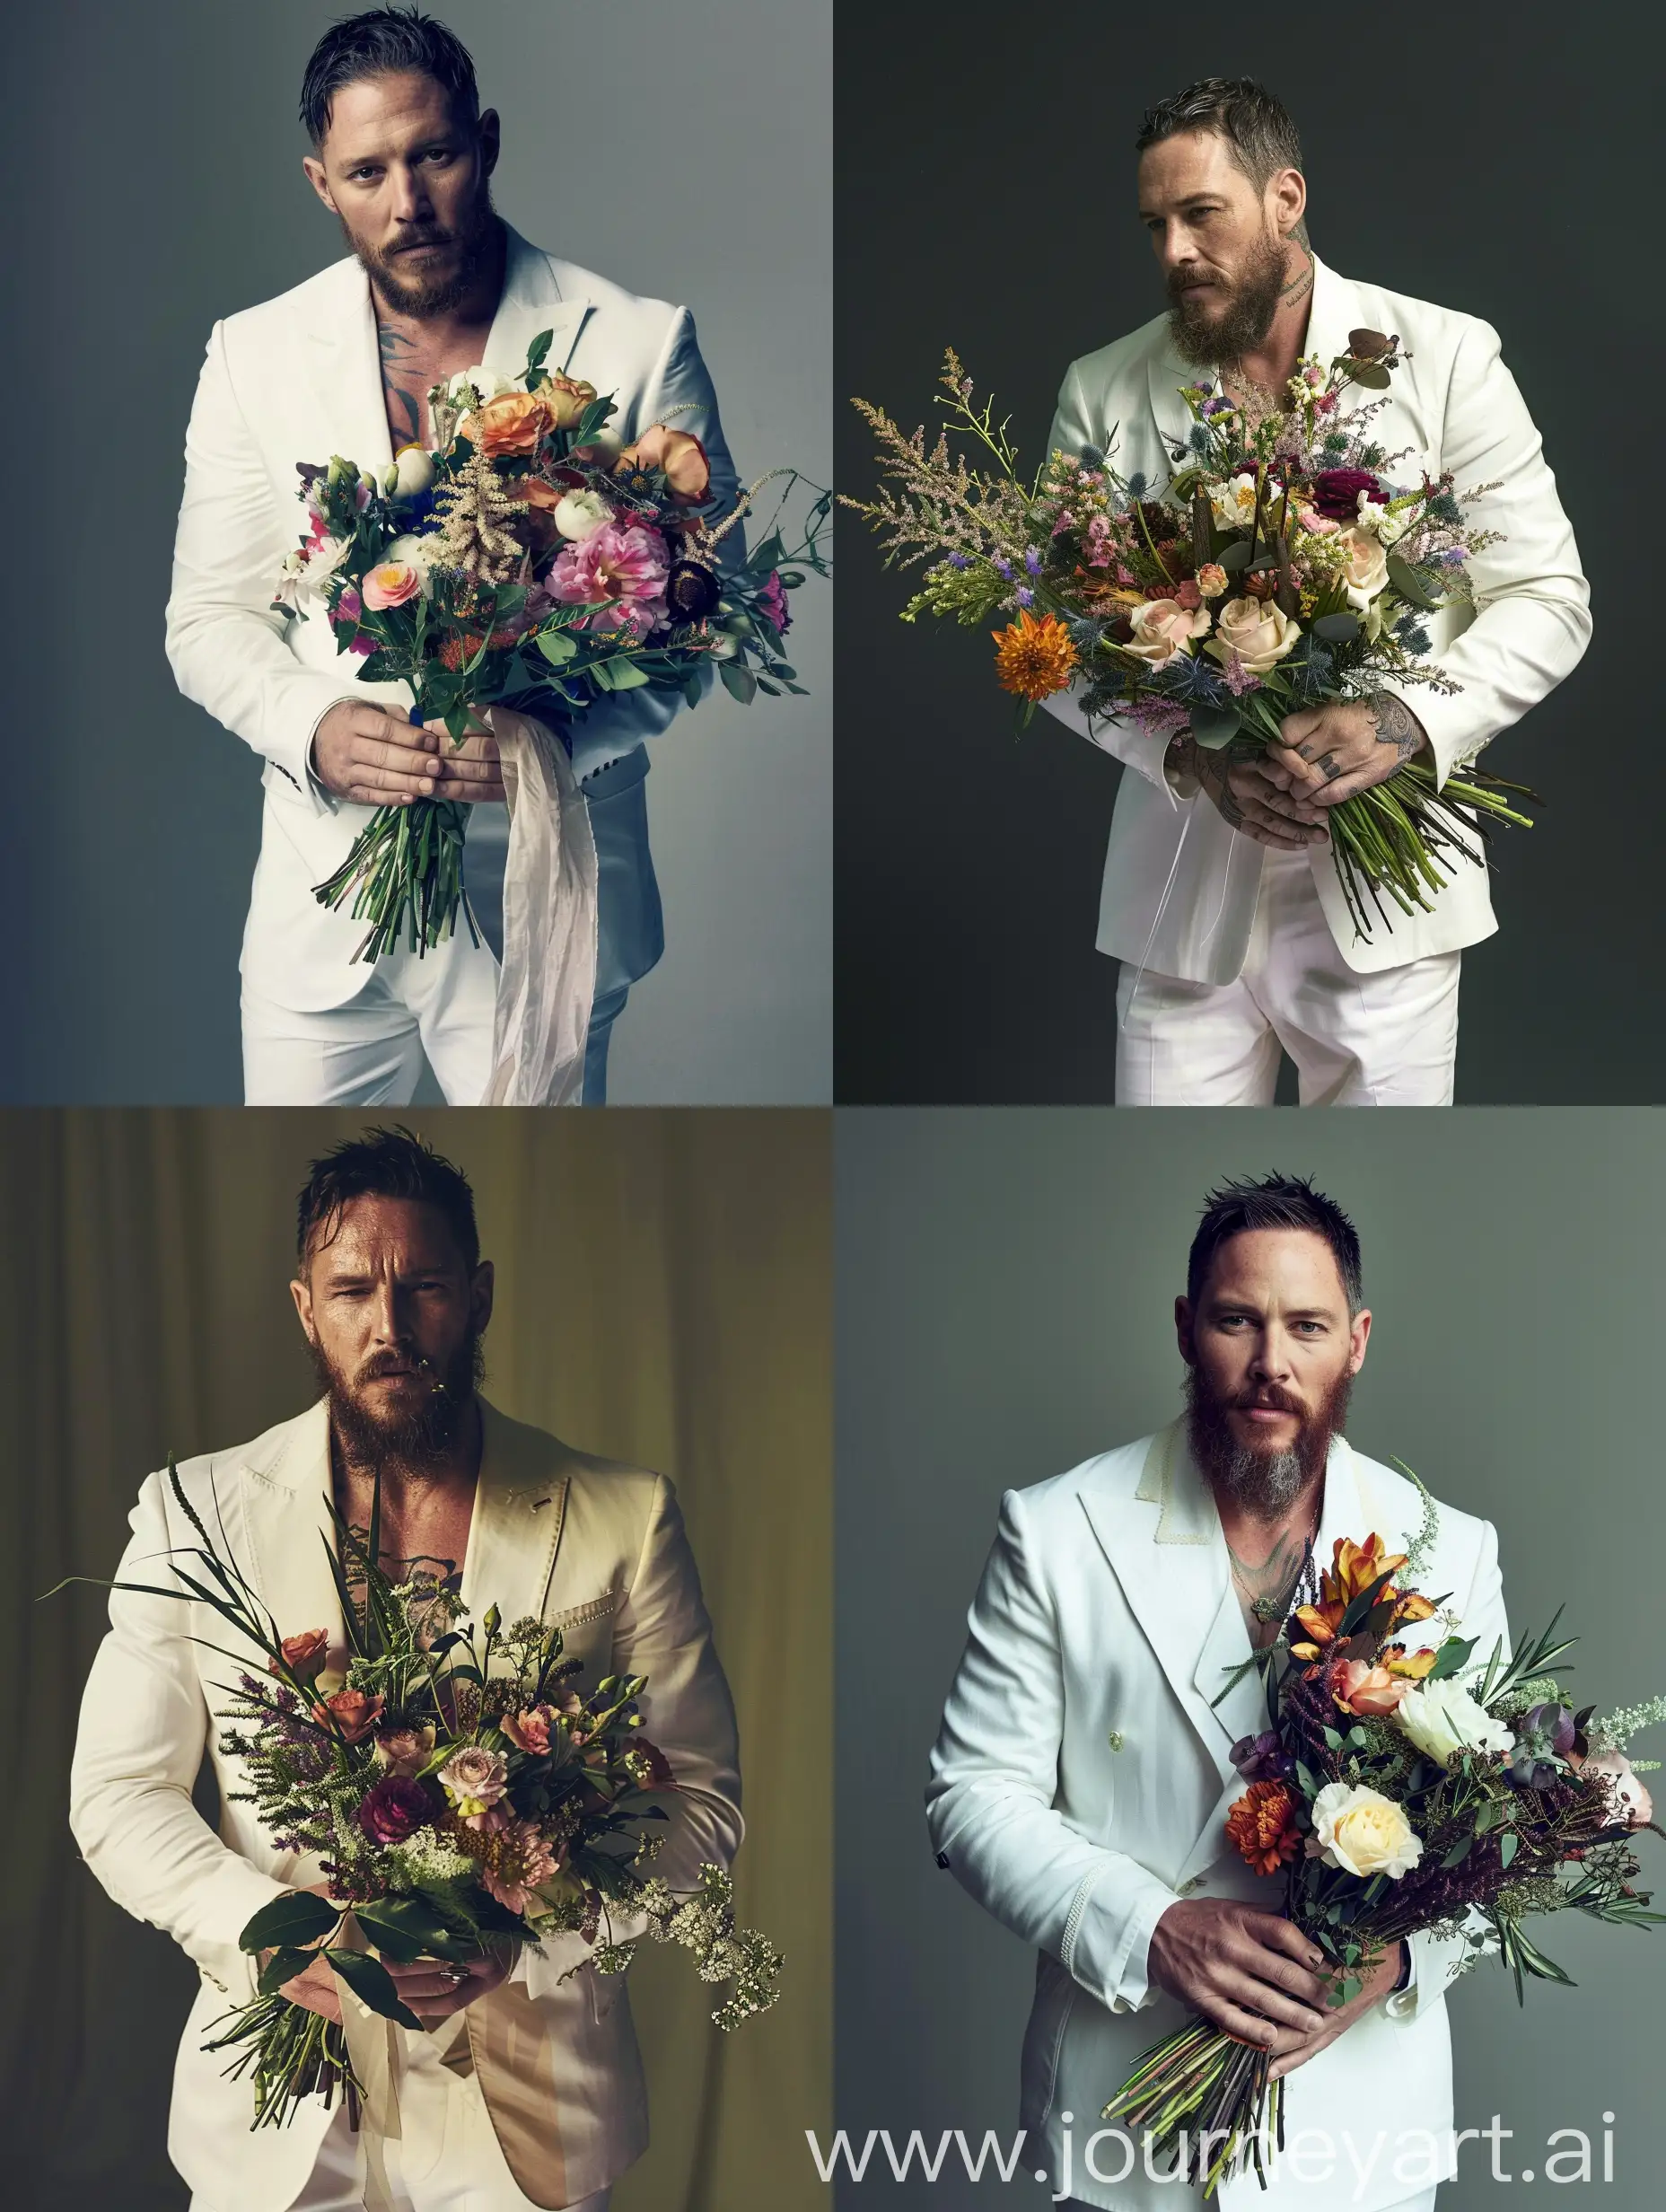 Tom-Hardy-Holding-Bouquet-of-Flowers-in-Elegant-White-Suit